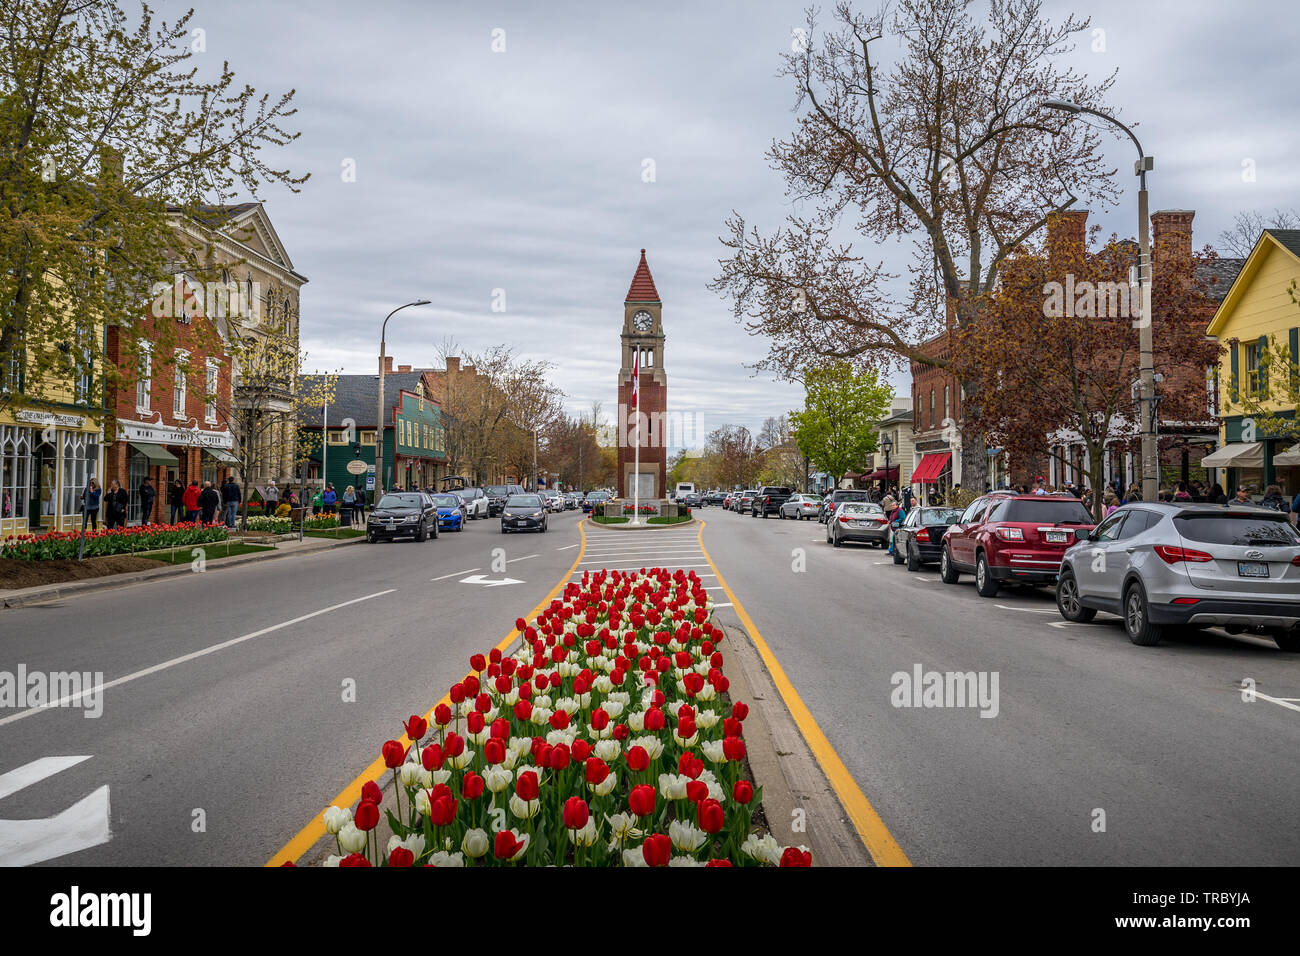 NIAGARA ON THE LAKE,CANADA - May 18, 2019 - In the streets of Niagara on the Lake. Niagara on the Lake is a town in Ontario, it is located on the Niag Stock Photo